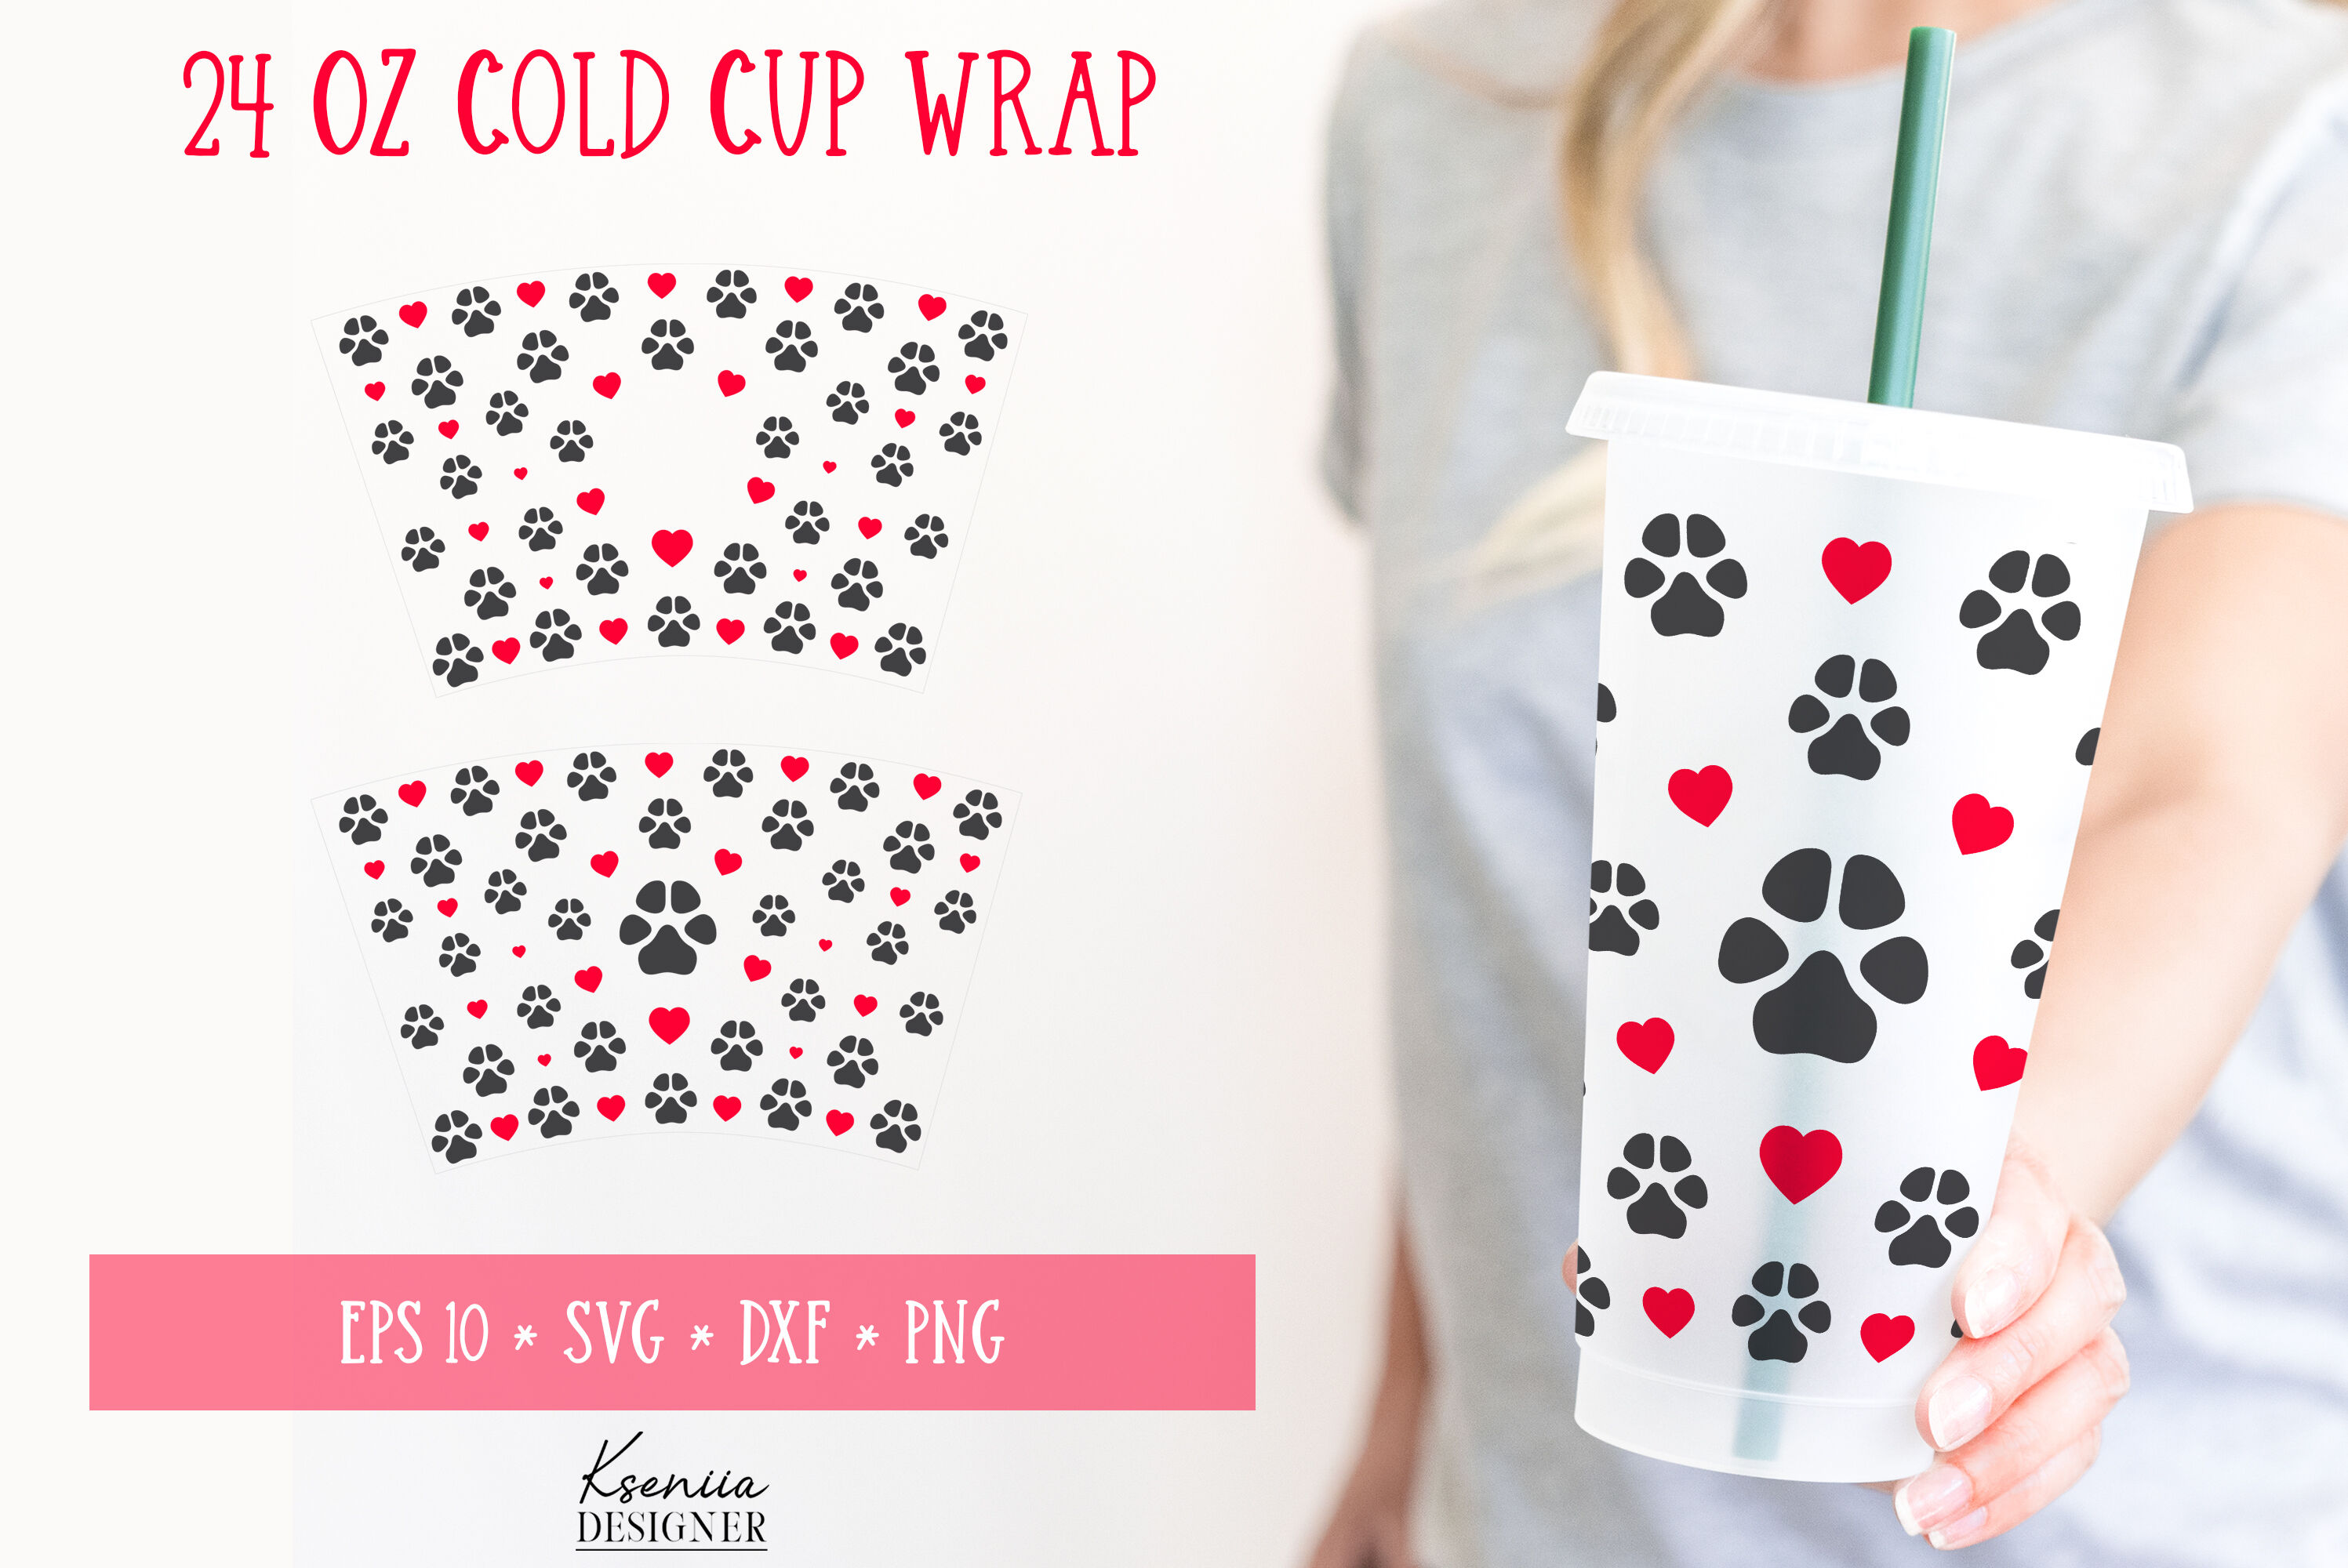 Cold Cup SVG NO HOLE Cup Wrap Svg Cold Cup Wrap Svg No Hole Cup Svg Designs  No Hole Cold Cup Svg Bundle Full Cup Wrap Svg N…